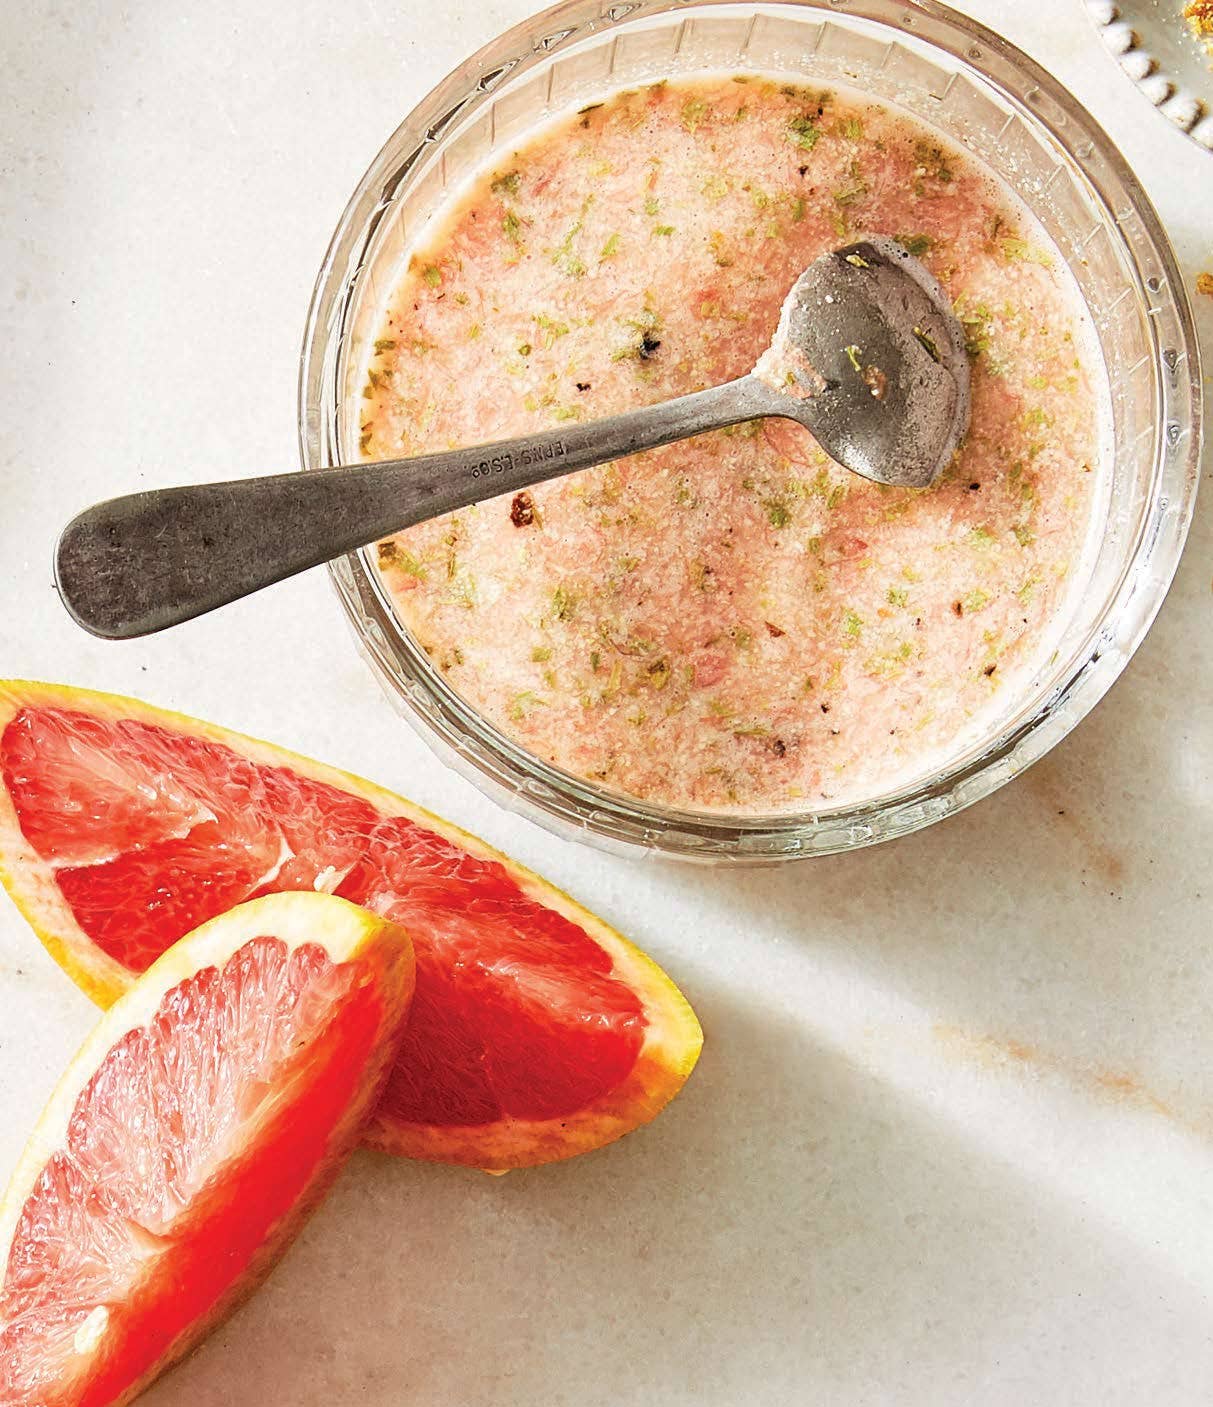 A light-pink homemade oil-free dressing with grapefruit and tarragon shown above in a clear glass cup or jar, with a silver spoon resting in it, with two wedges of grapefruit beside it